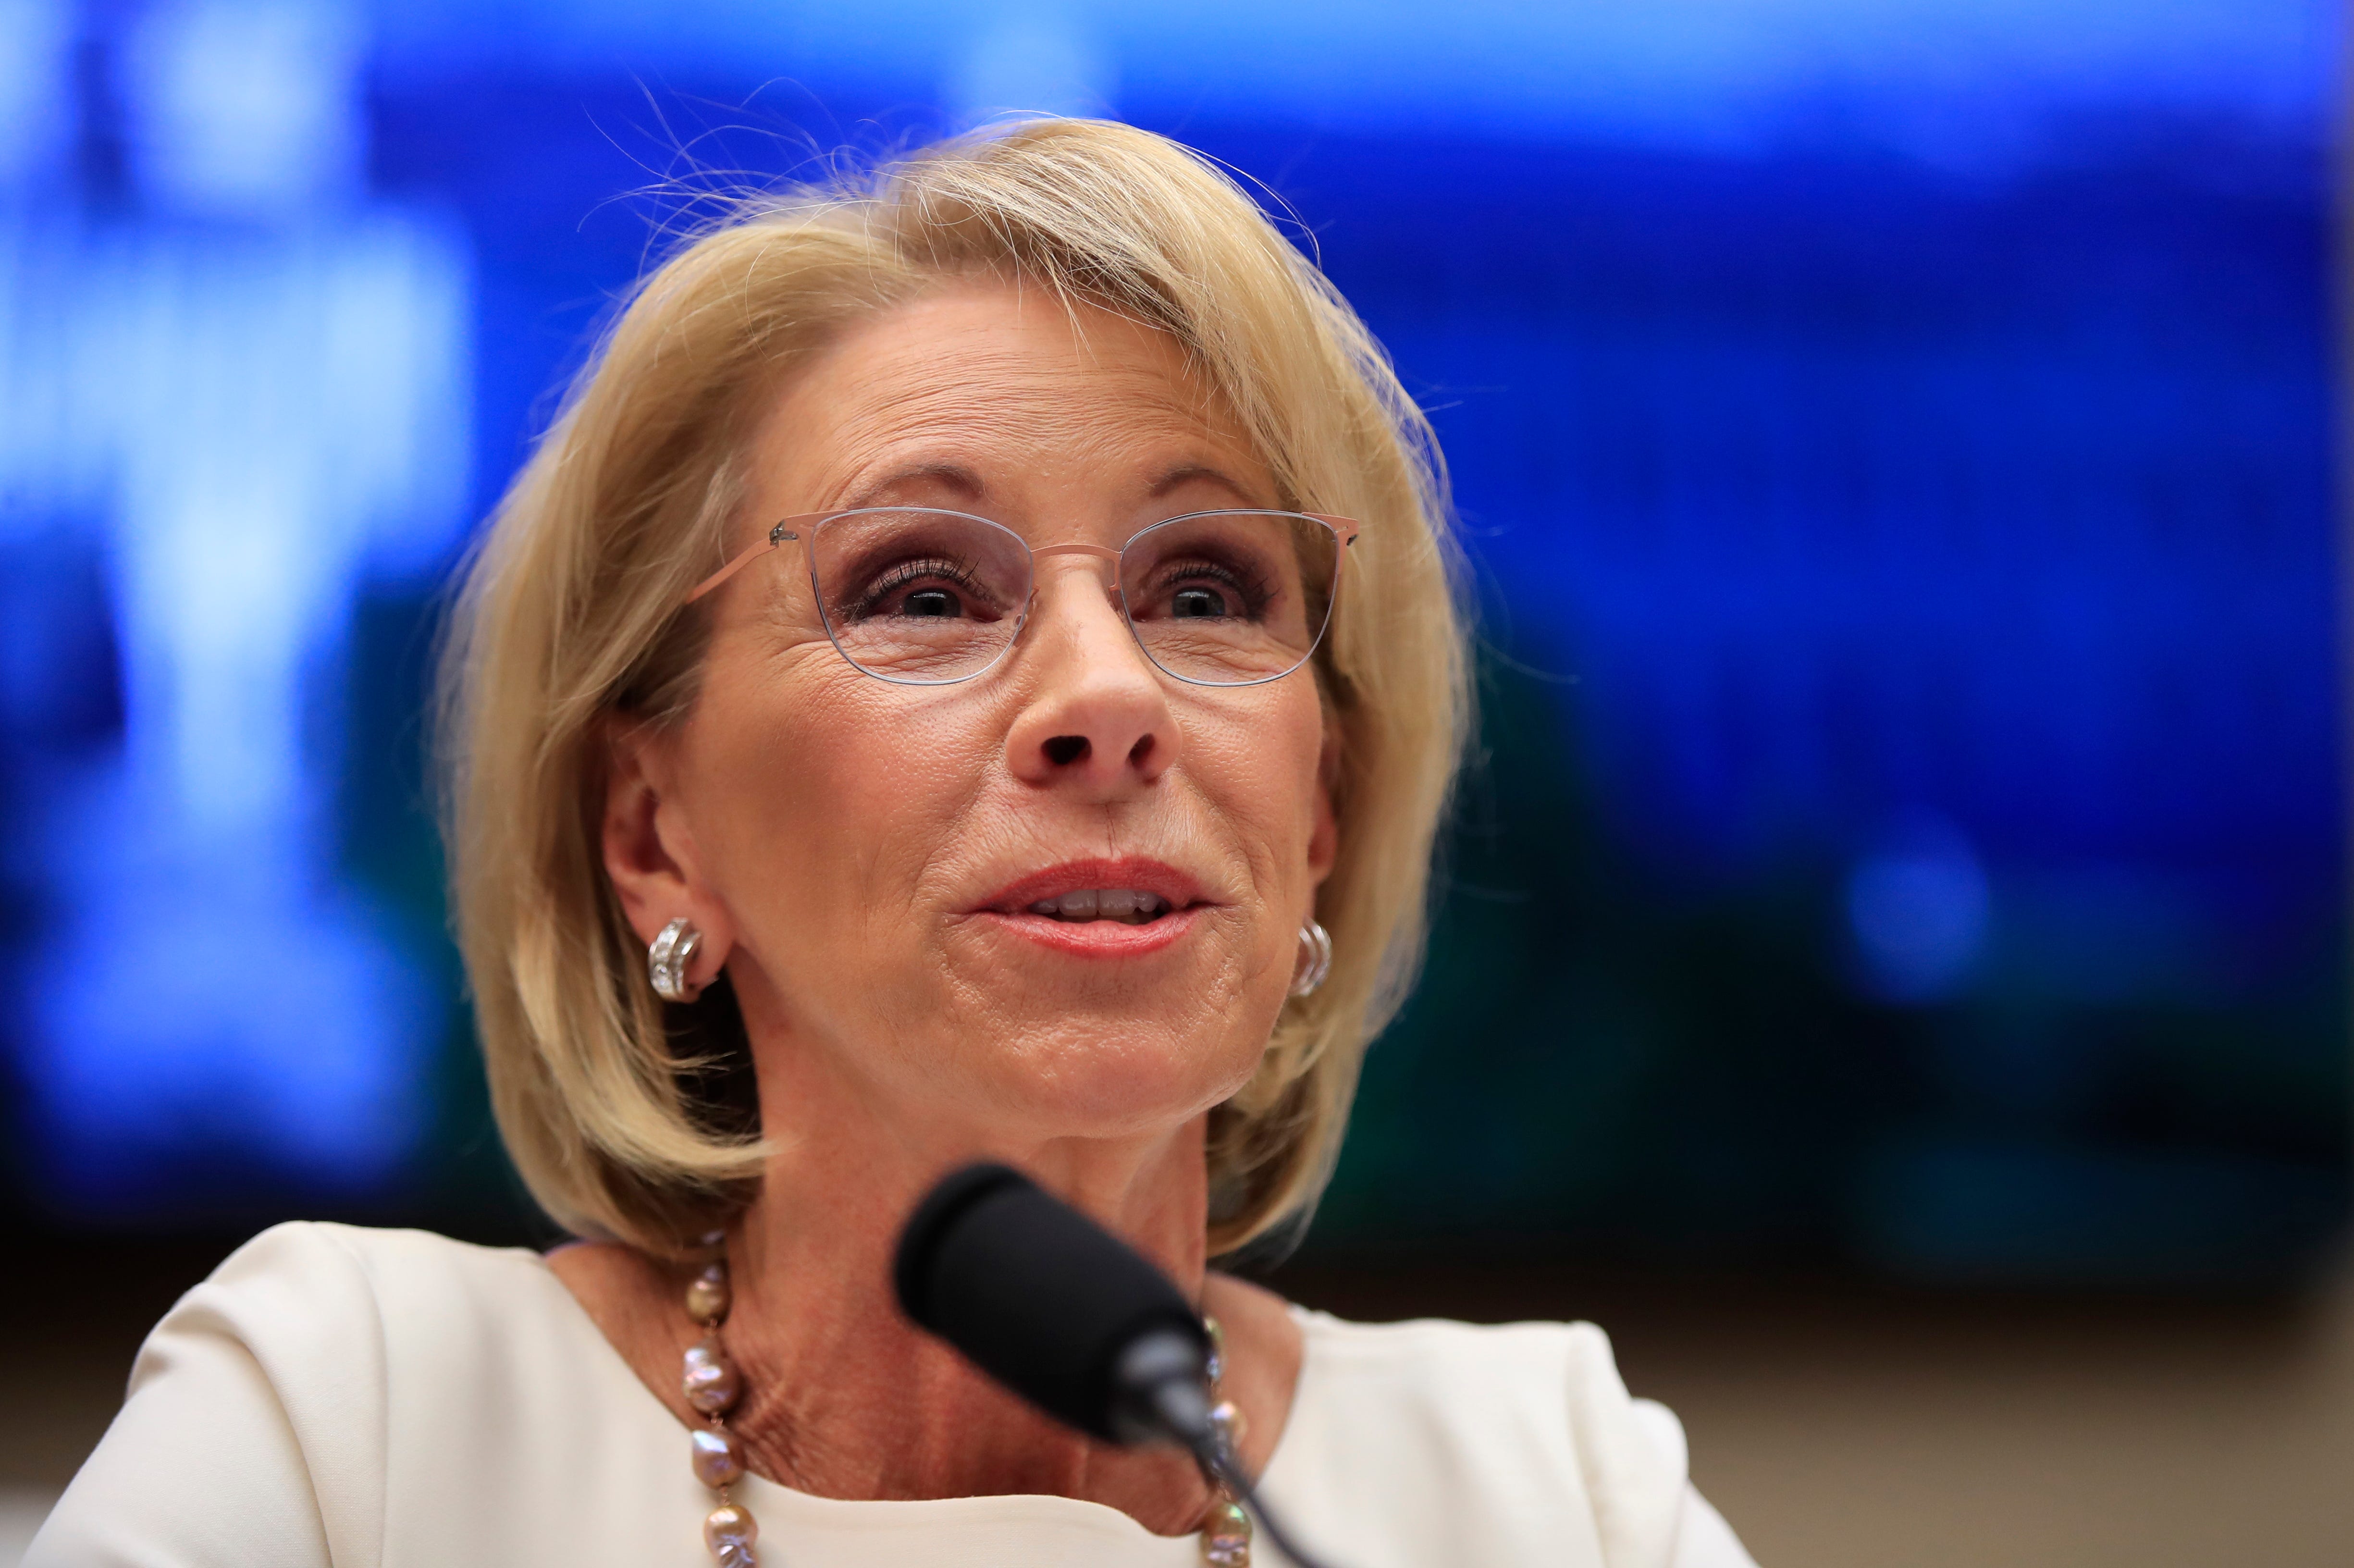 Education Secretary Betsy DeVos testifies before the House Education and Labor Committee at a hearing her department's policies Wednesday on Capitol Hill.